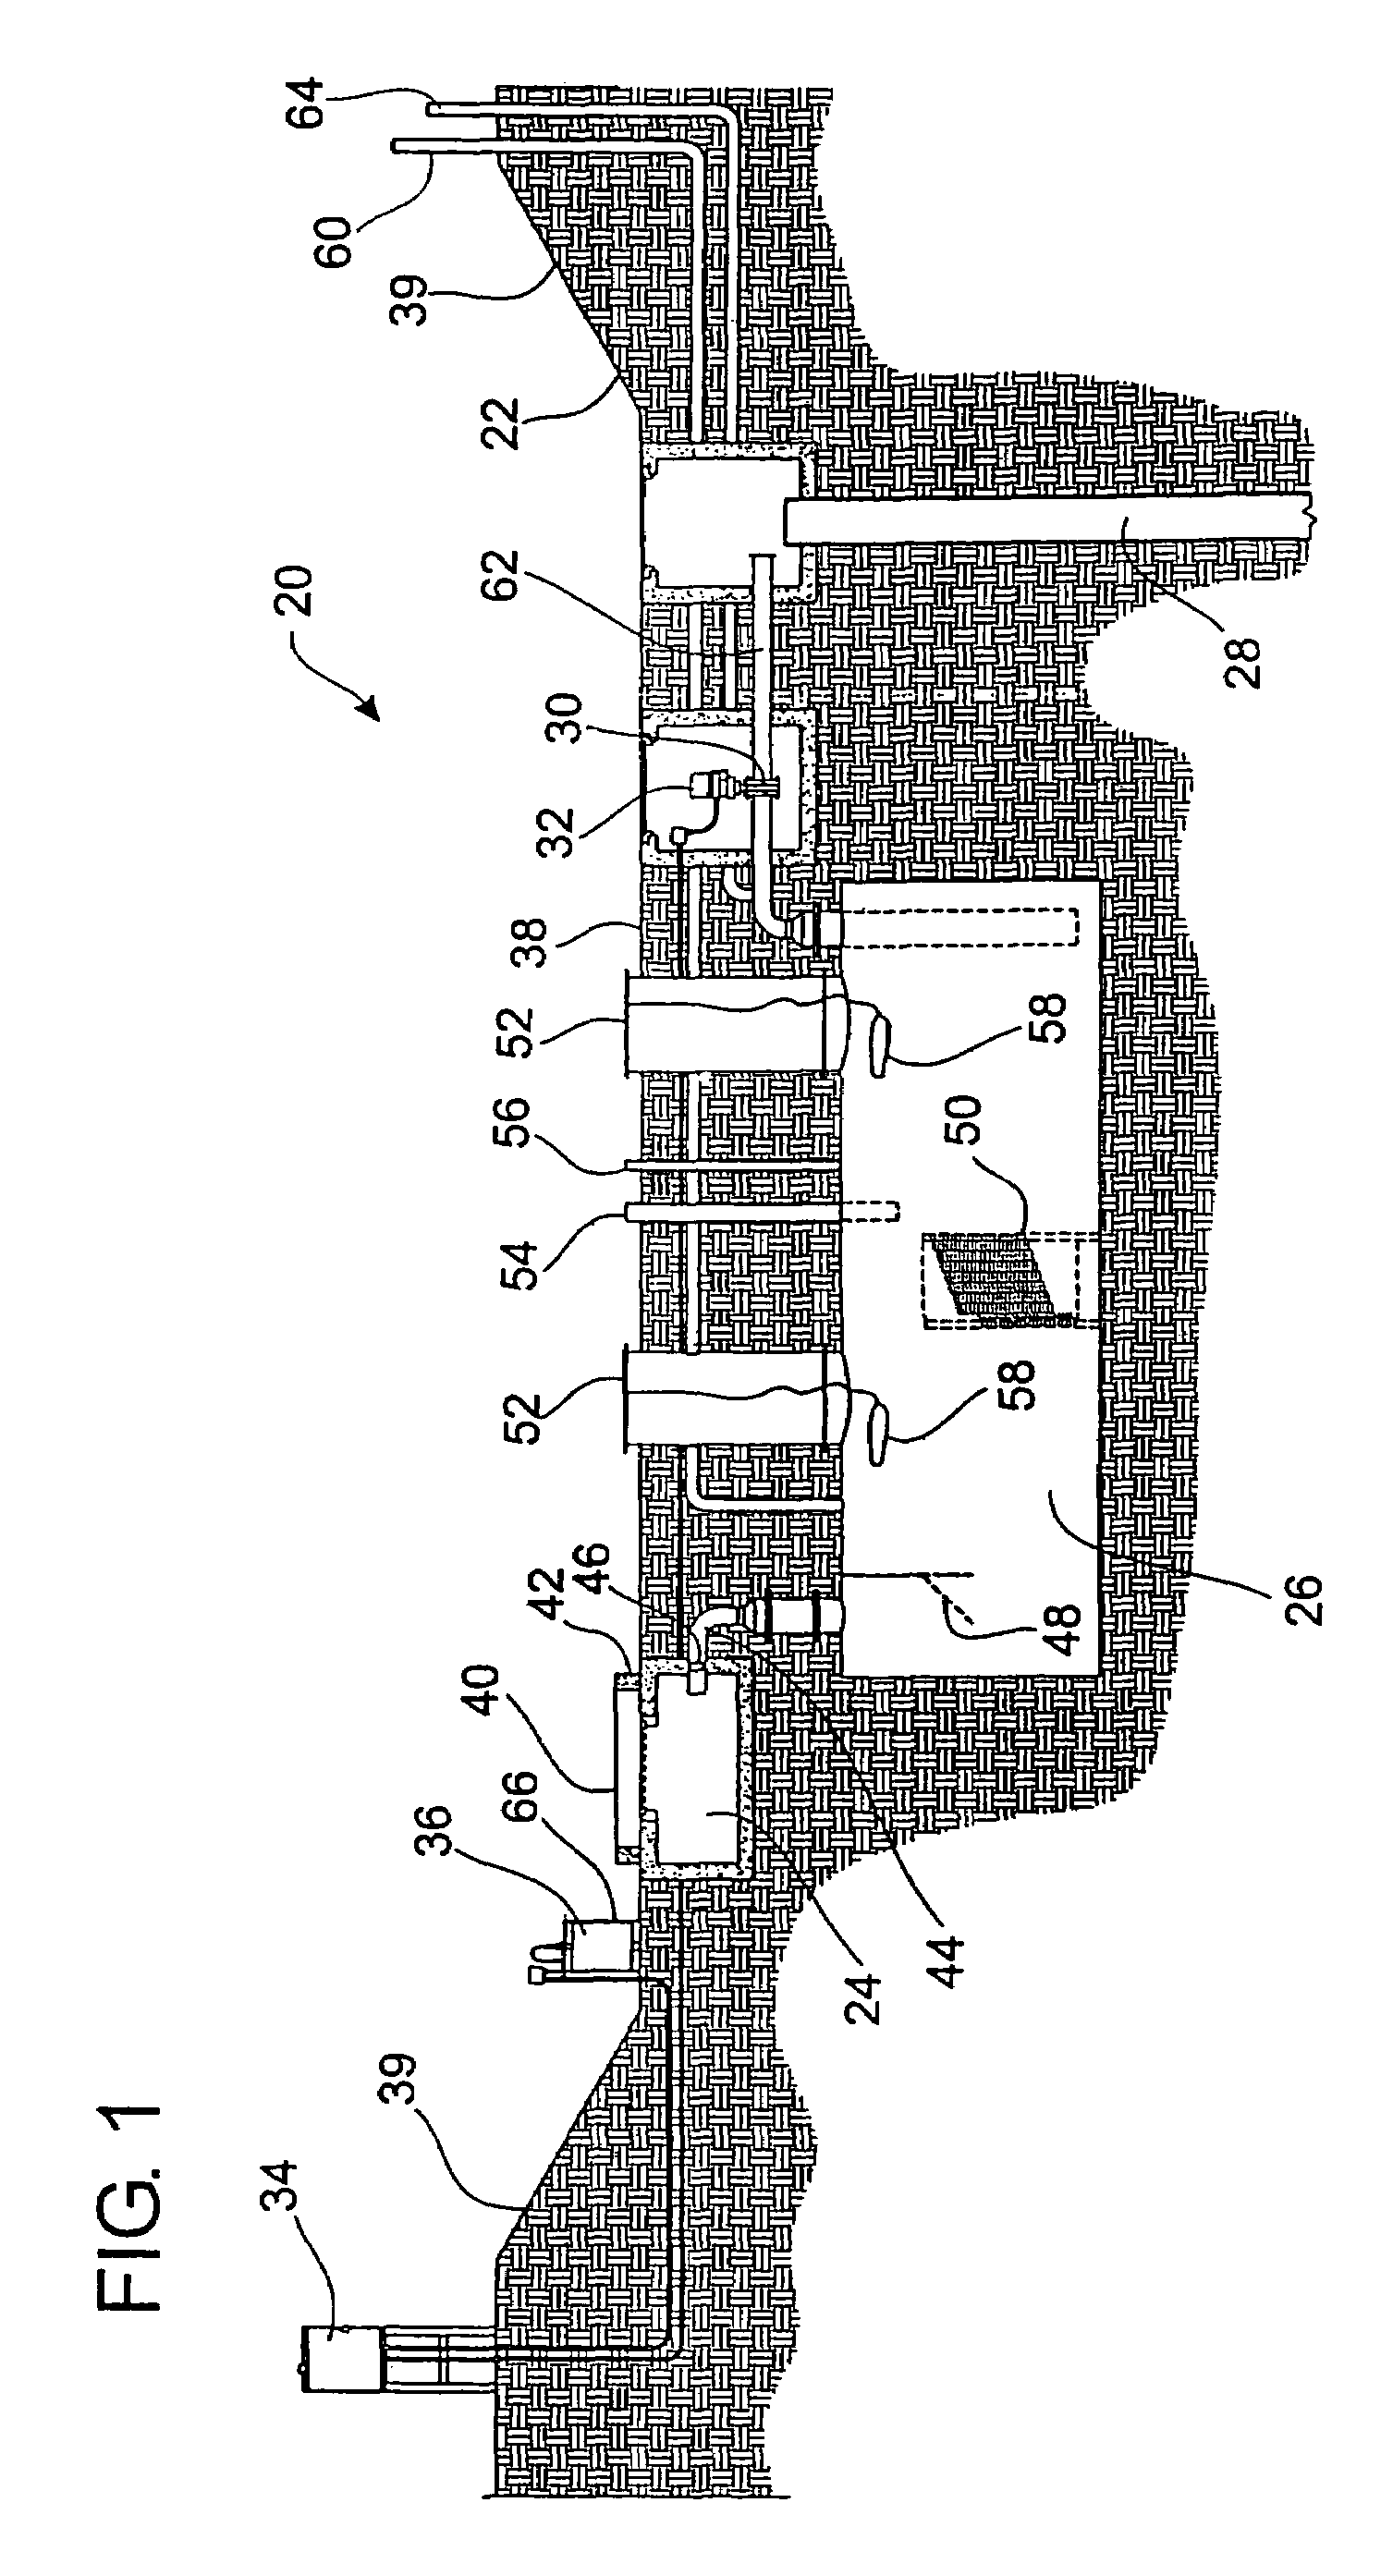 Stormwater pretreatment and disposal system and method